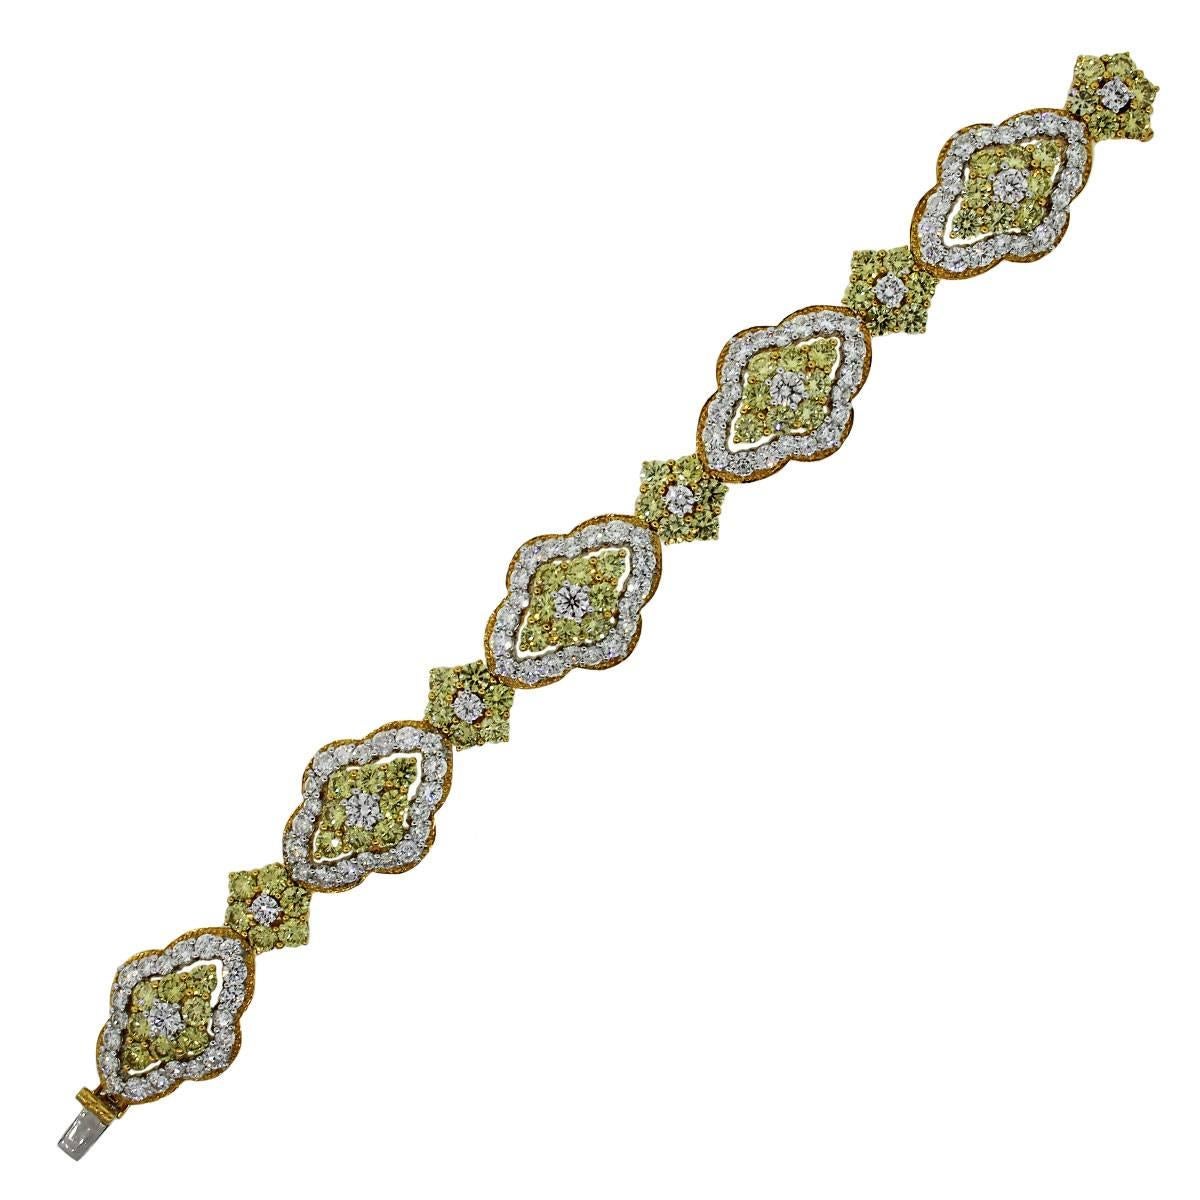 Material: 18k two tone gold
Diamond Details: Approximately 14ctw HPHT treated yellow diamonds and approximately 7.7ctw white round brilliant diamonds. White diamonds are G/H in color and VS in clarity.
Clasp: Tongue in box clasp
Measurements: 7.5″ x